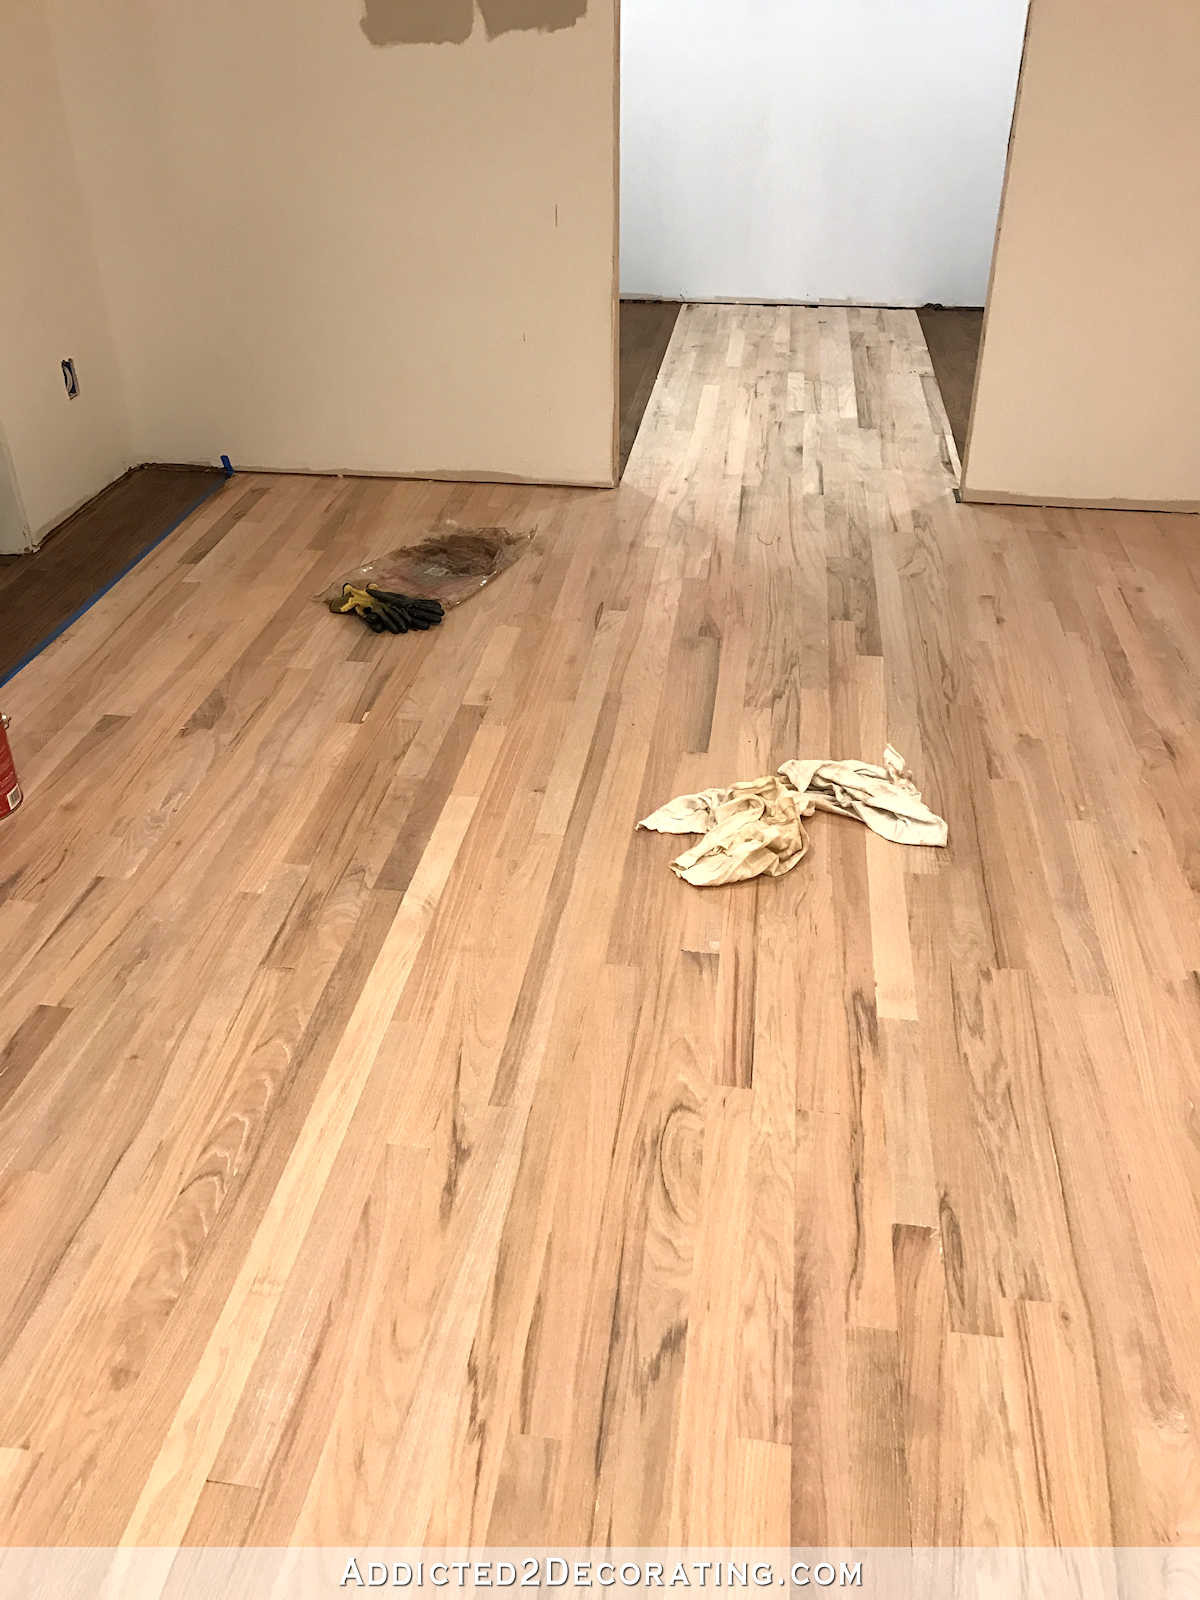 20 Popular How to Refurbish Hardwood Floors Yourself 2024 free download how to refurbish hardwood floors yourself of adventures in staining my red oak hardwood floors products process intended for staining red oak hardwood floors 12 breakfast room and center of 